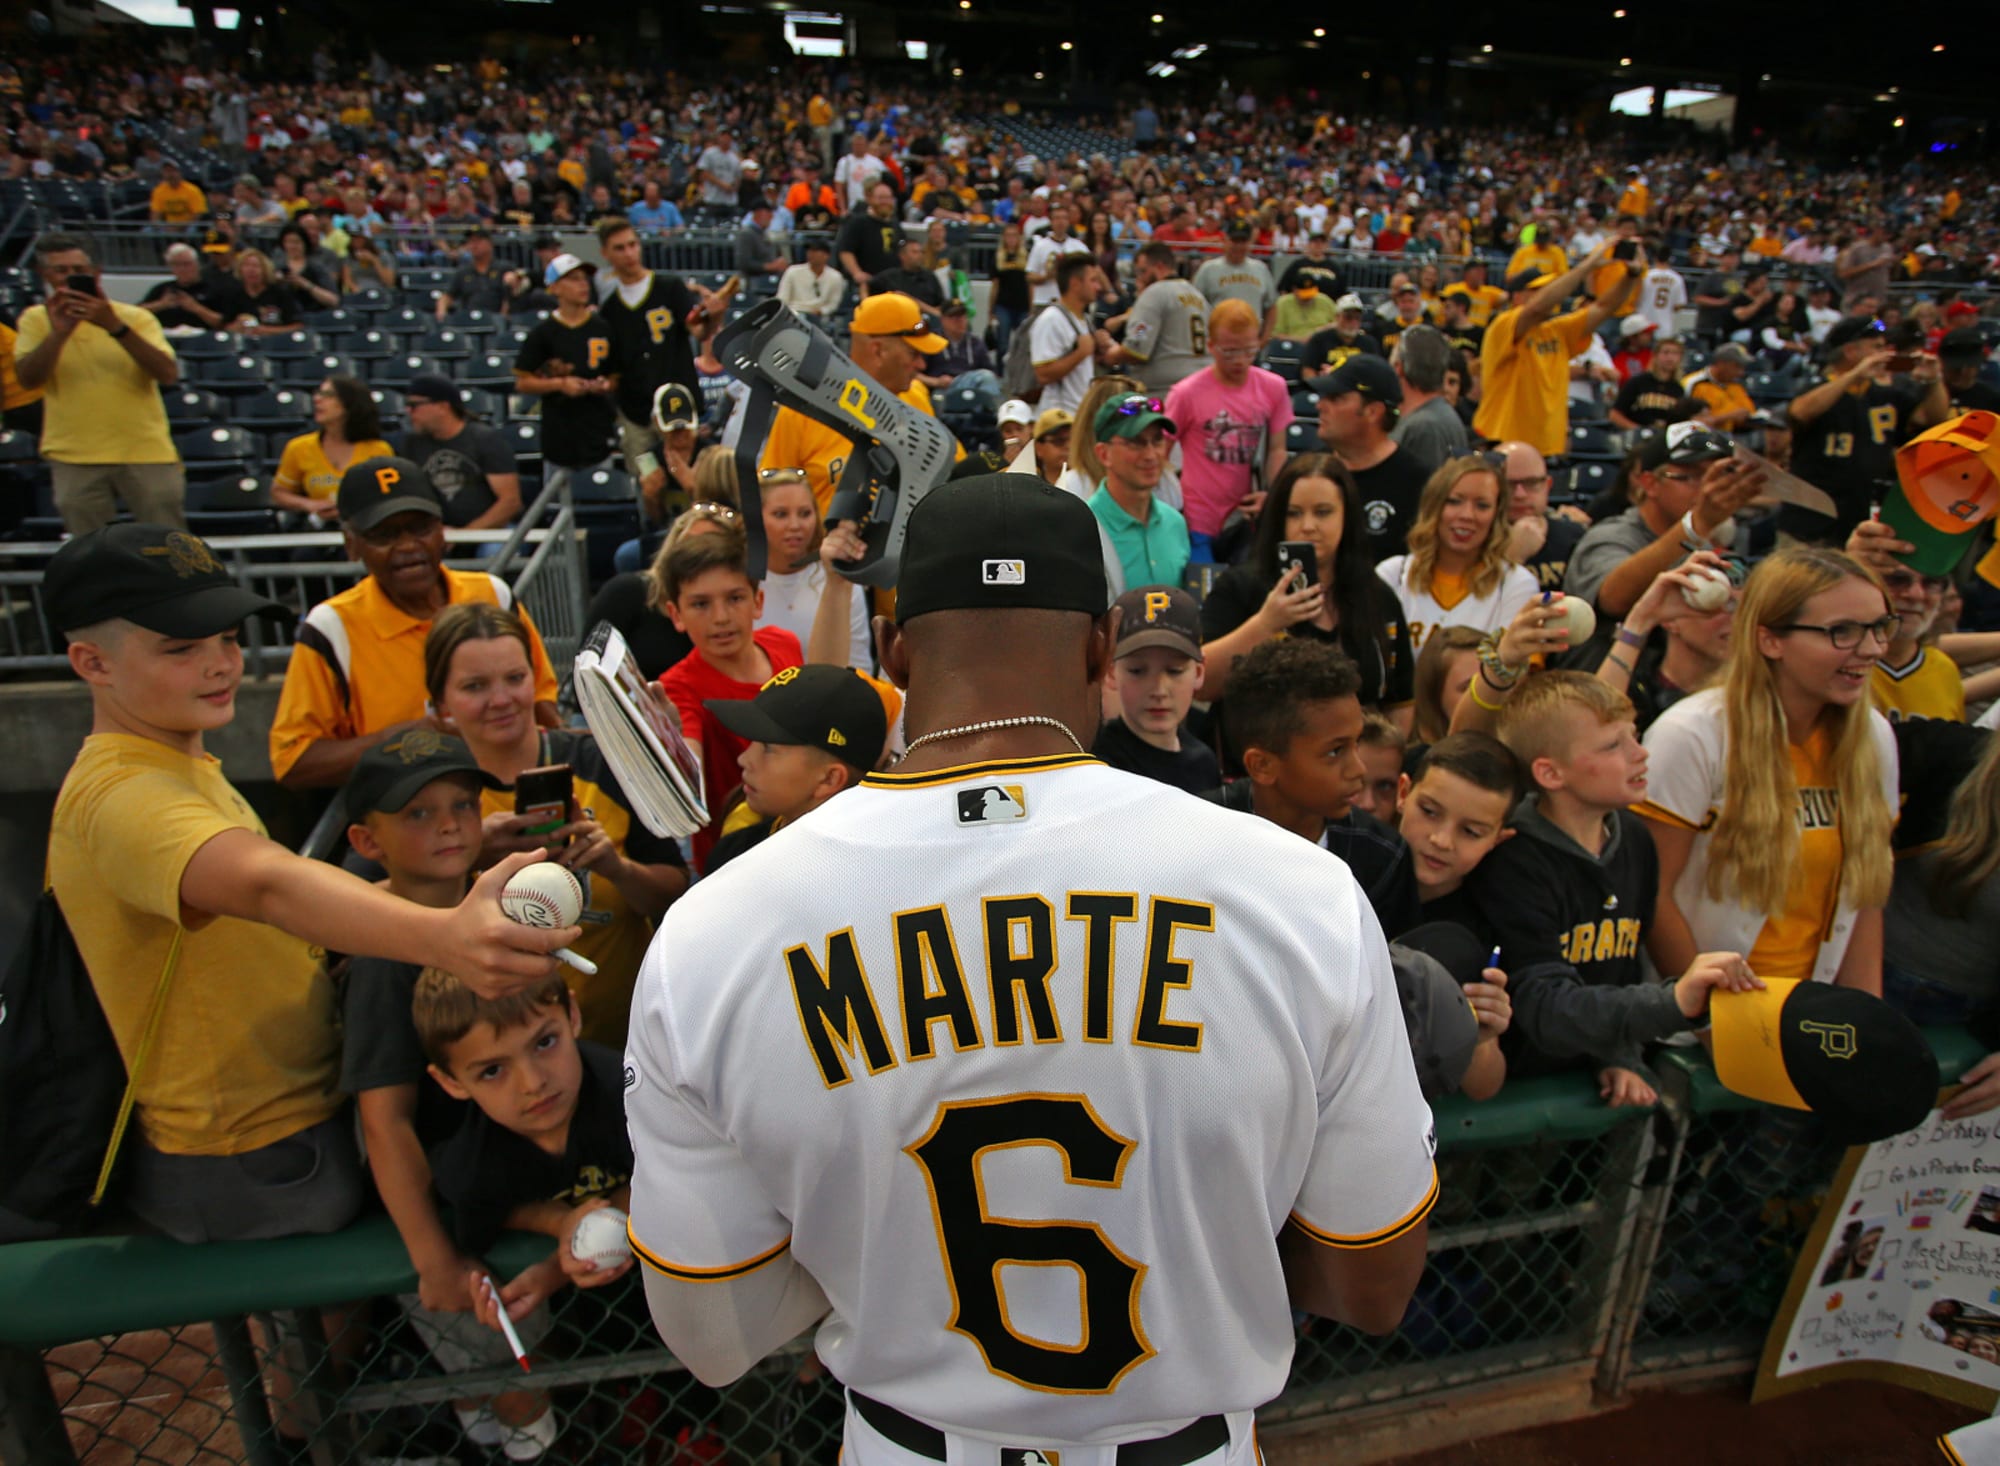 May 29, 2016: Pittsburgh Pirates left fielder Starling Marte #6